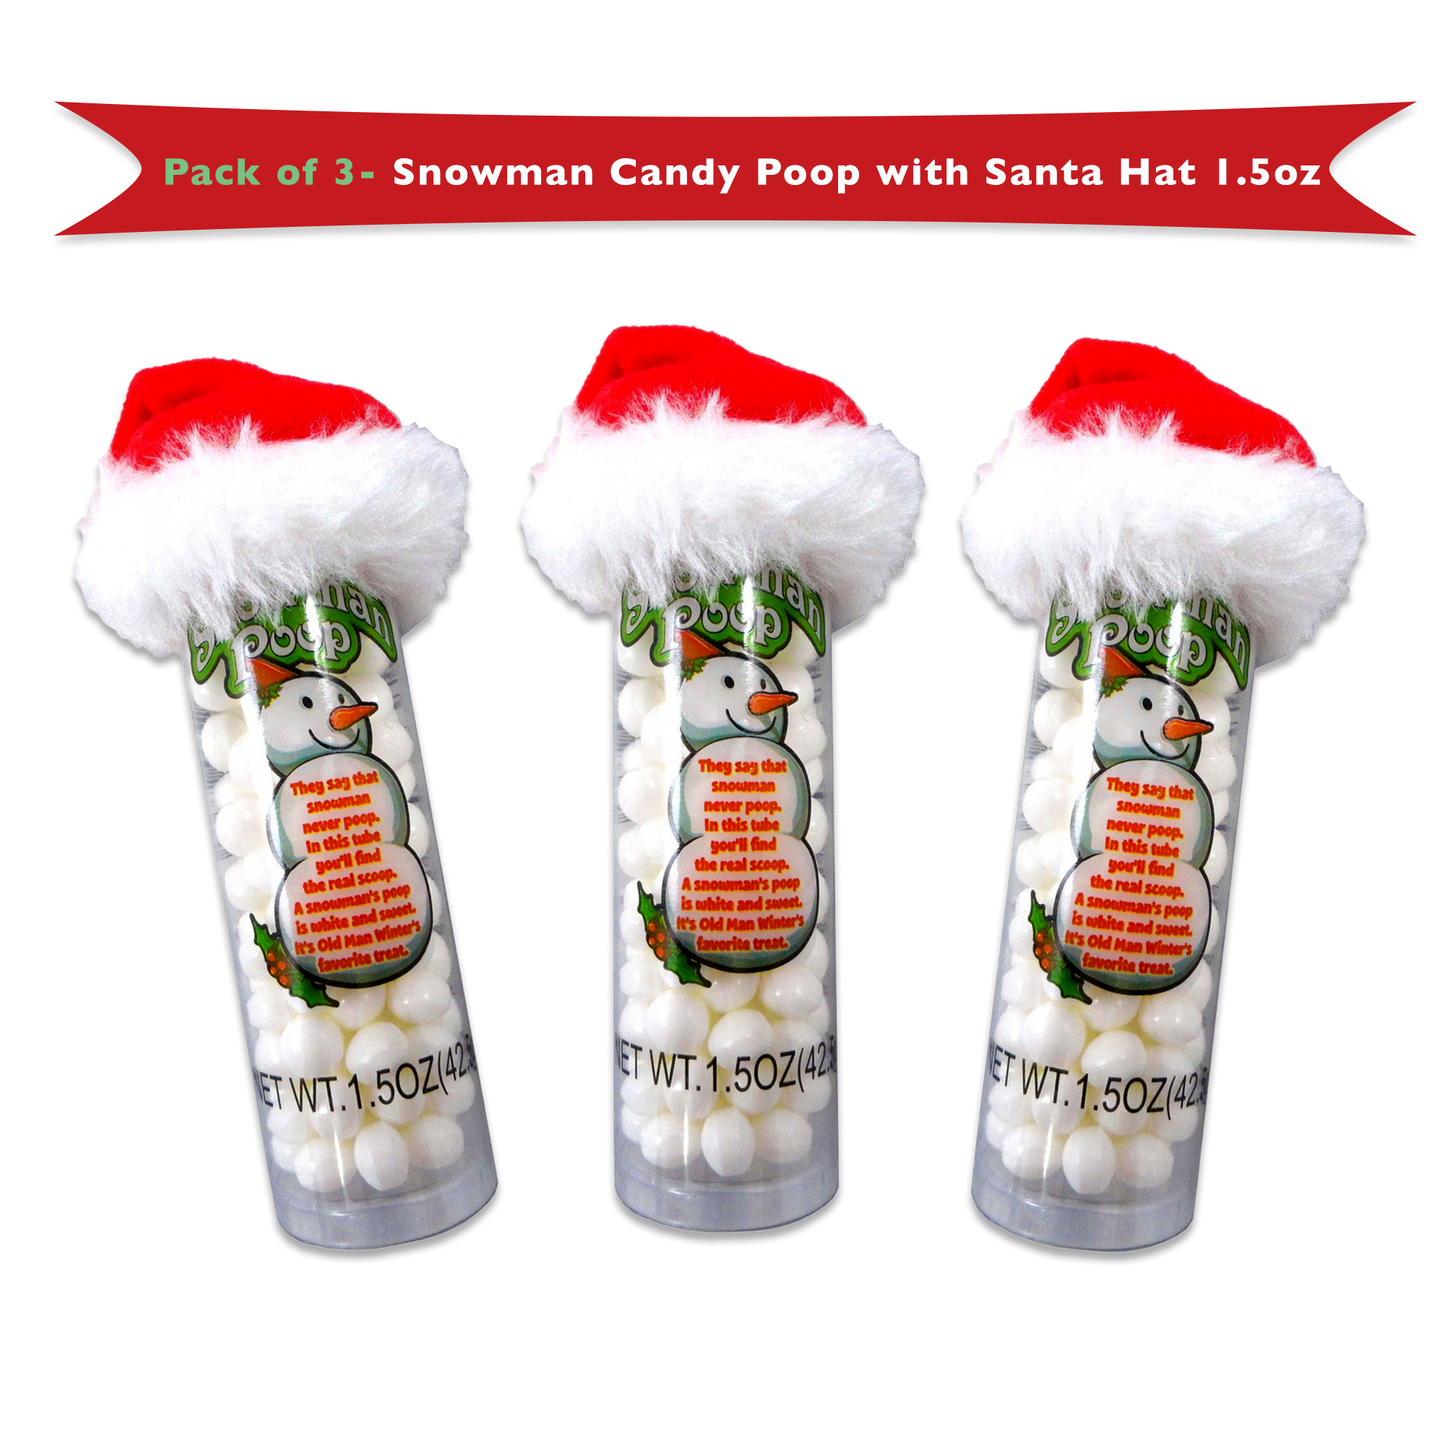 Snowman Poop Candy with Mini Santa Hat 1.5oz Pack of 3, Christmas Candy Stocking Stuffers, Christmas Candy Kids, Santa Gummy Candy, Kids Stocking Stuffers Candy